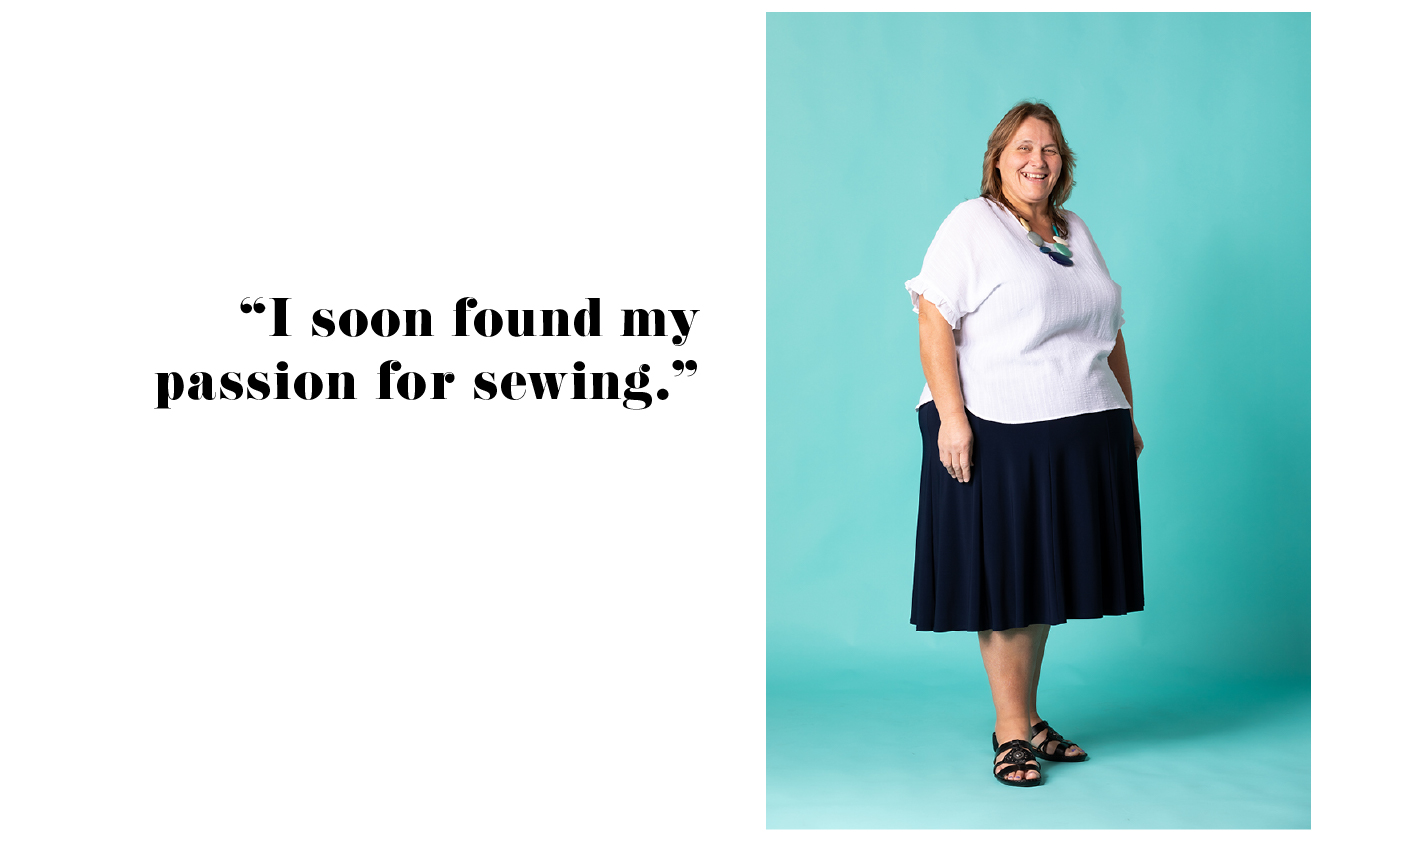 "I soon found my passion for sewing"